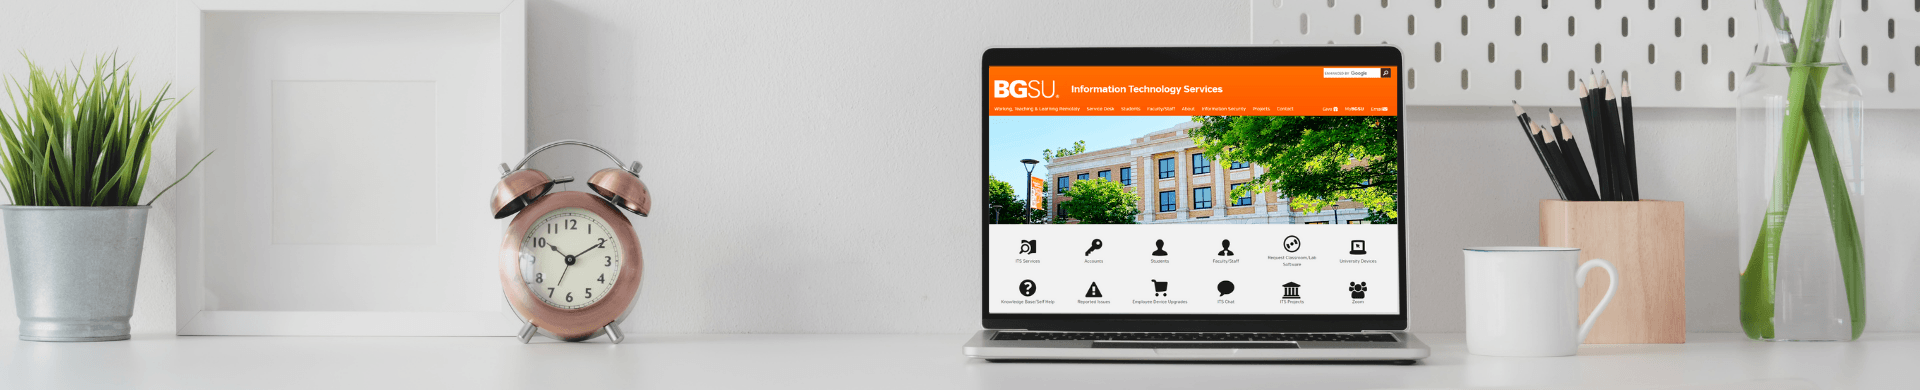 page banner image of desk with laptop and bgsu its homepage on screen